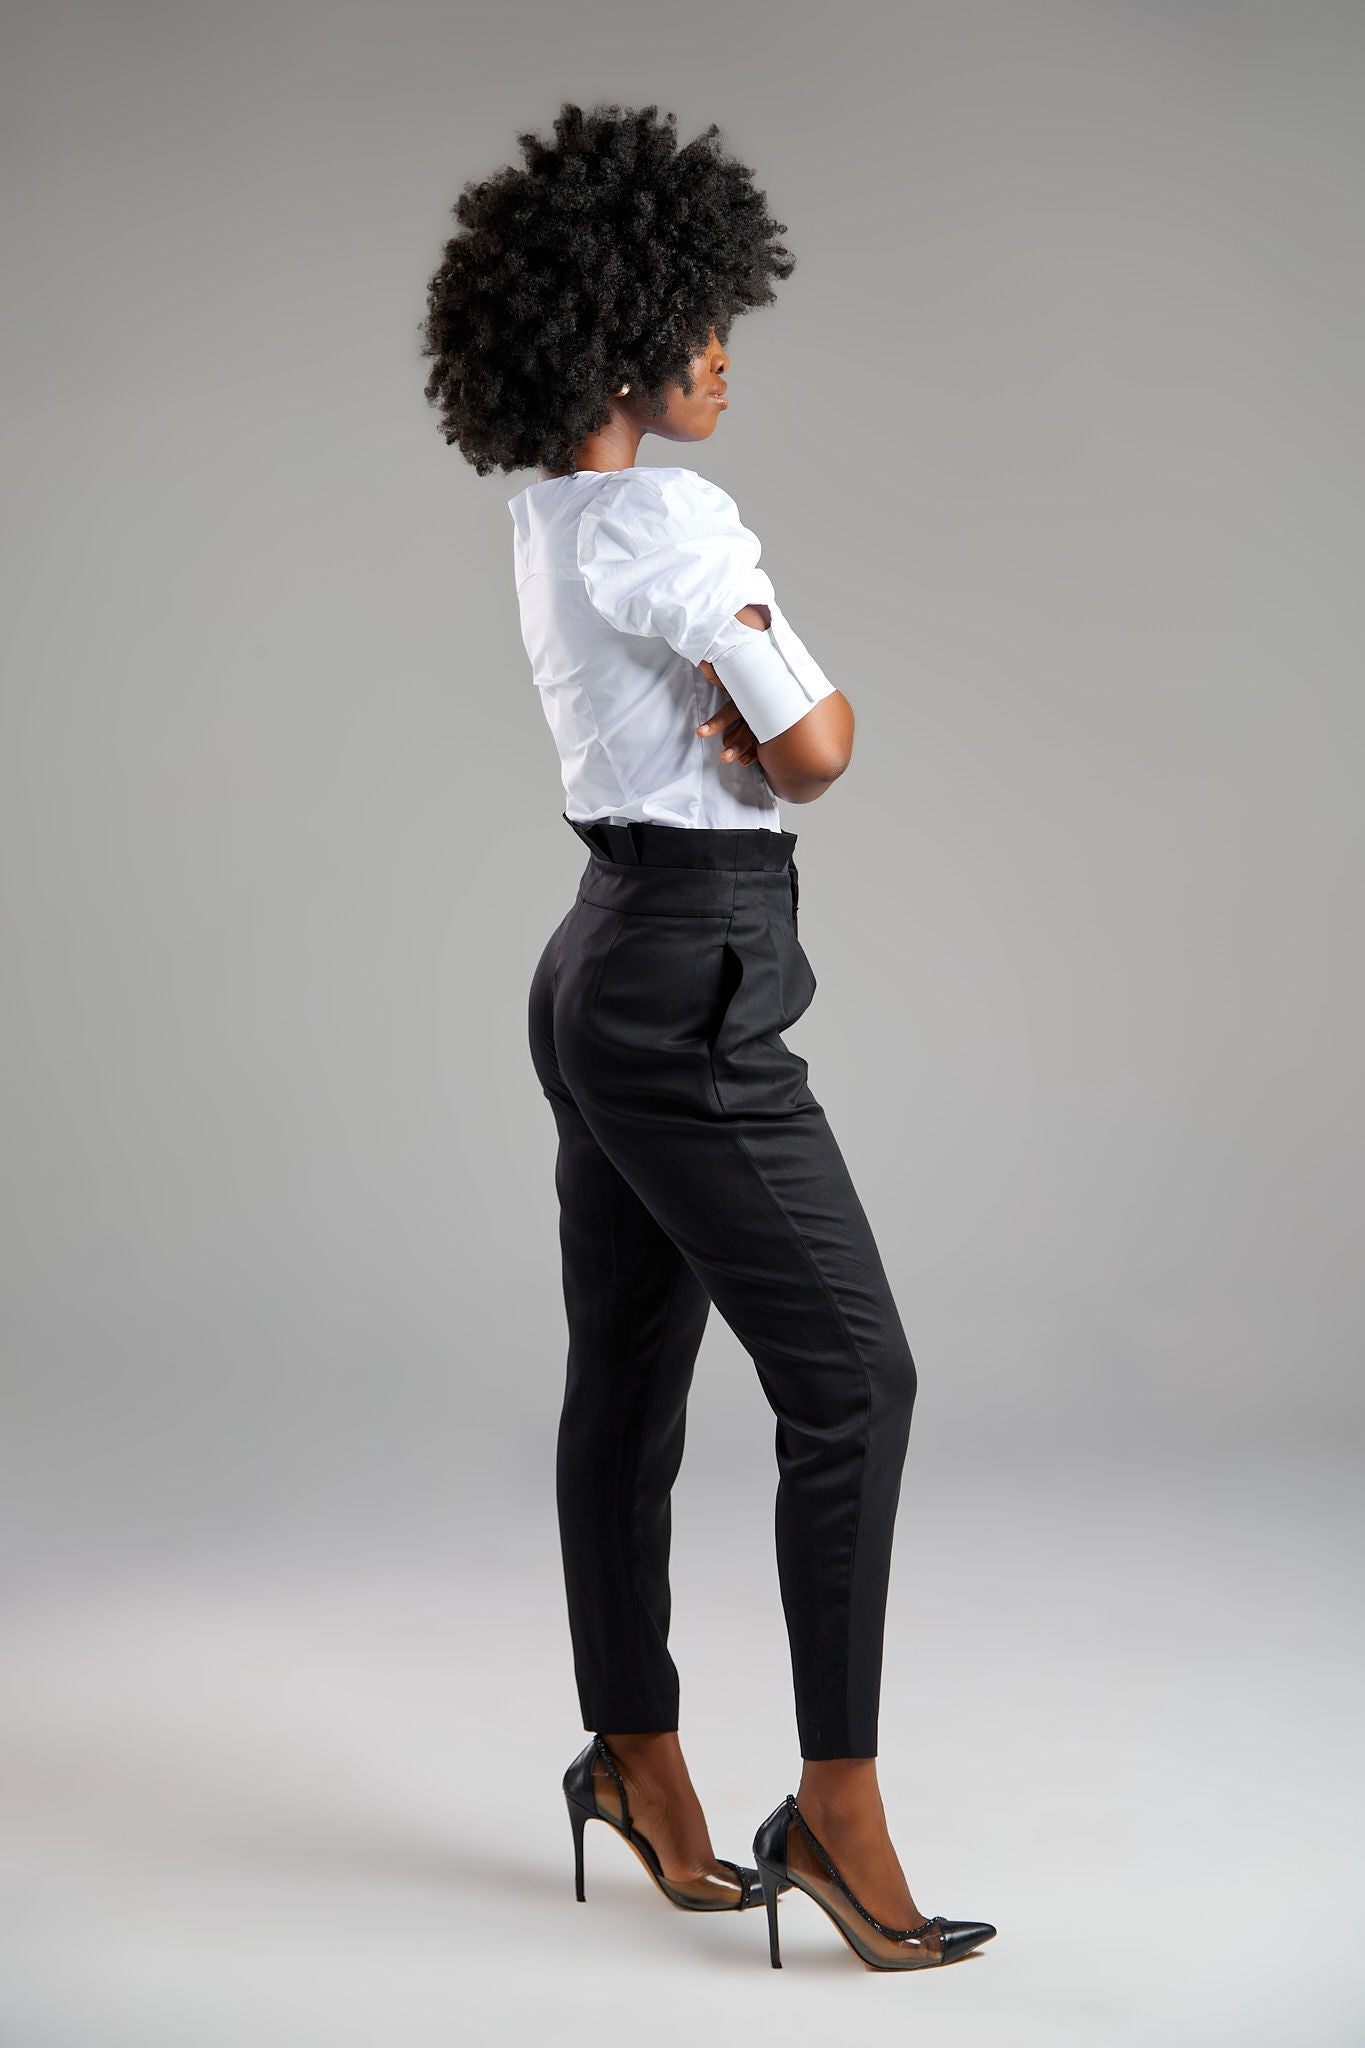 Seragyi Loulou tapered pleats pants, part of the Women's Suits collection, made from silky, eco-friendly lyocell twill. These Women's Suit Pants offer comfortable draping around the hips and thighs, with versatility to pair with blazers or casual tanks. A perfect addition to your Women's Clothing wardrobe.